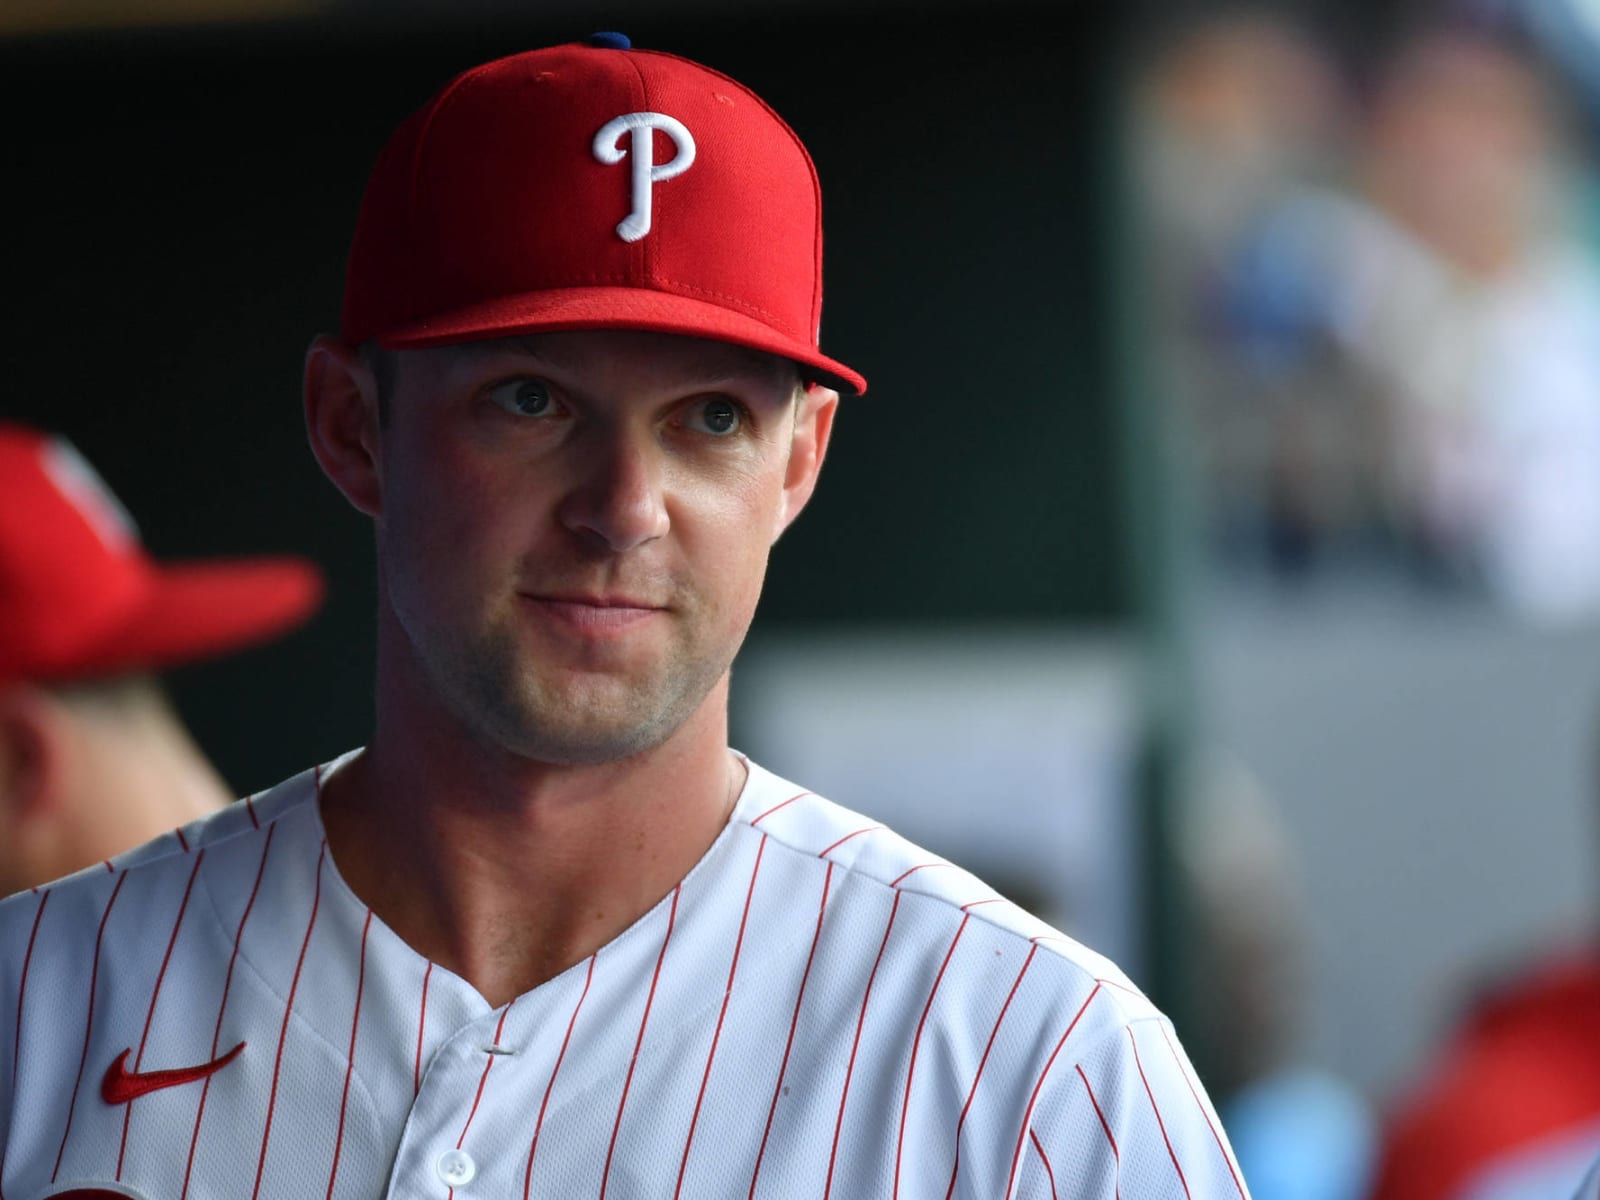 Watch: Rhys Hoskins receives nice ovation during ring ceremony